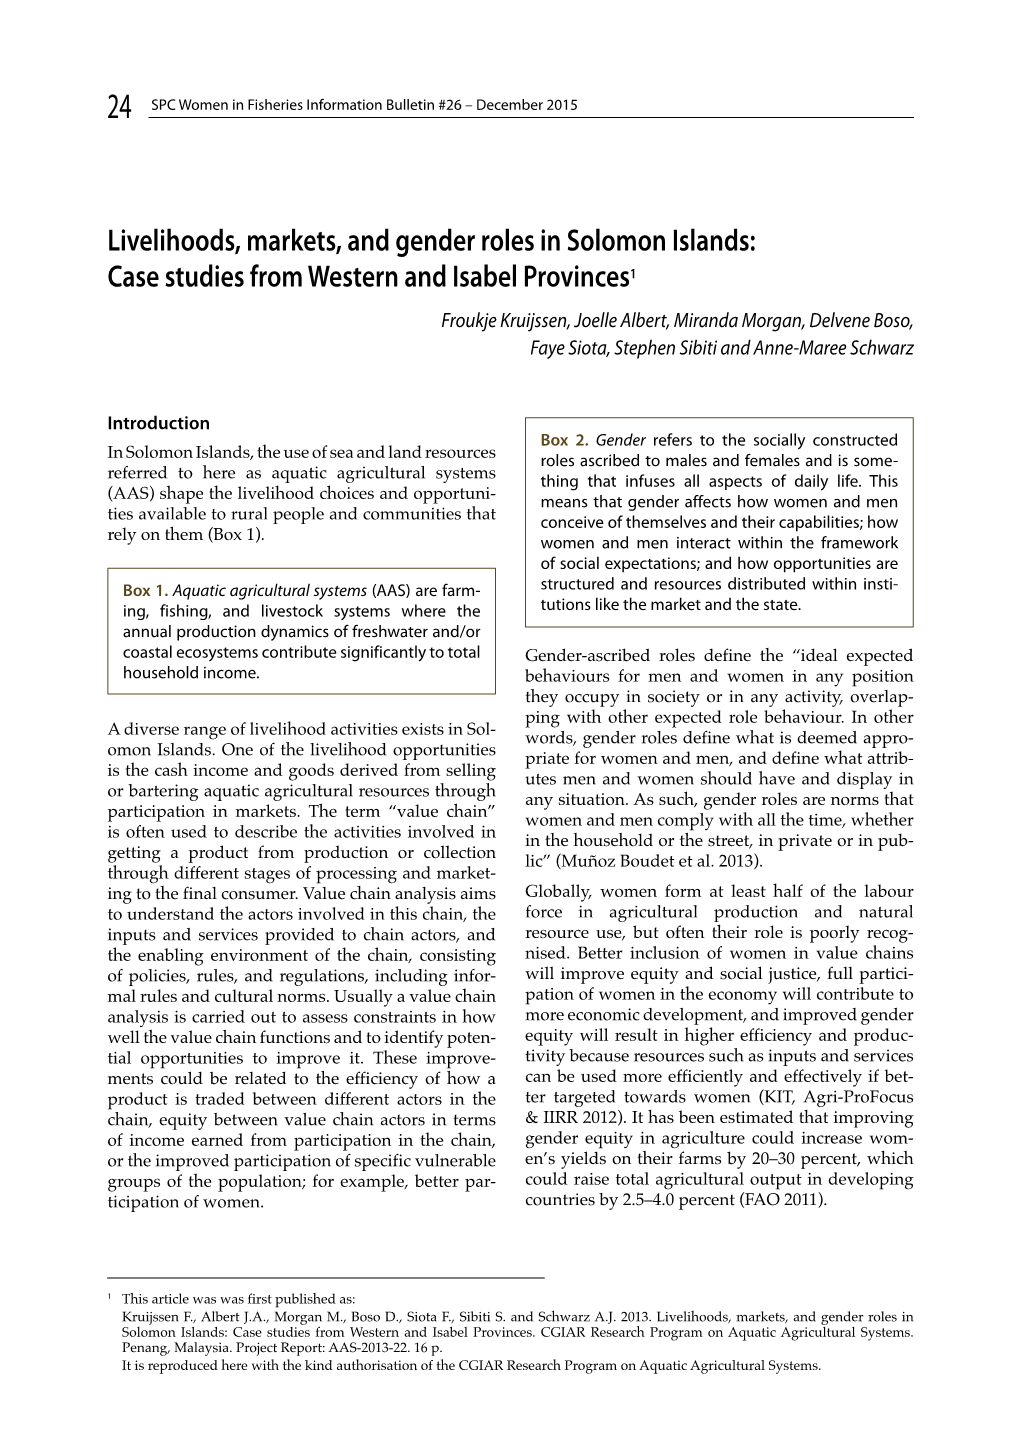 Livelihoods, Markets, and Gender Roles in Solomon Islands: Case Studies from Western and Isabel Provinces